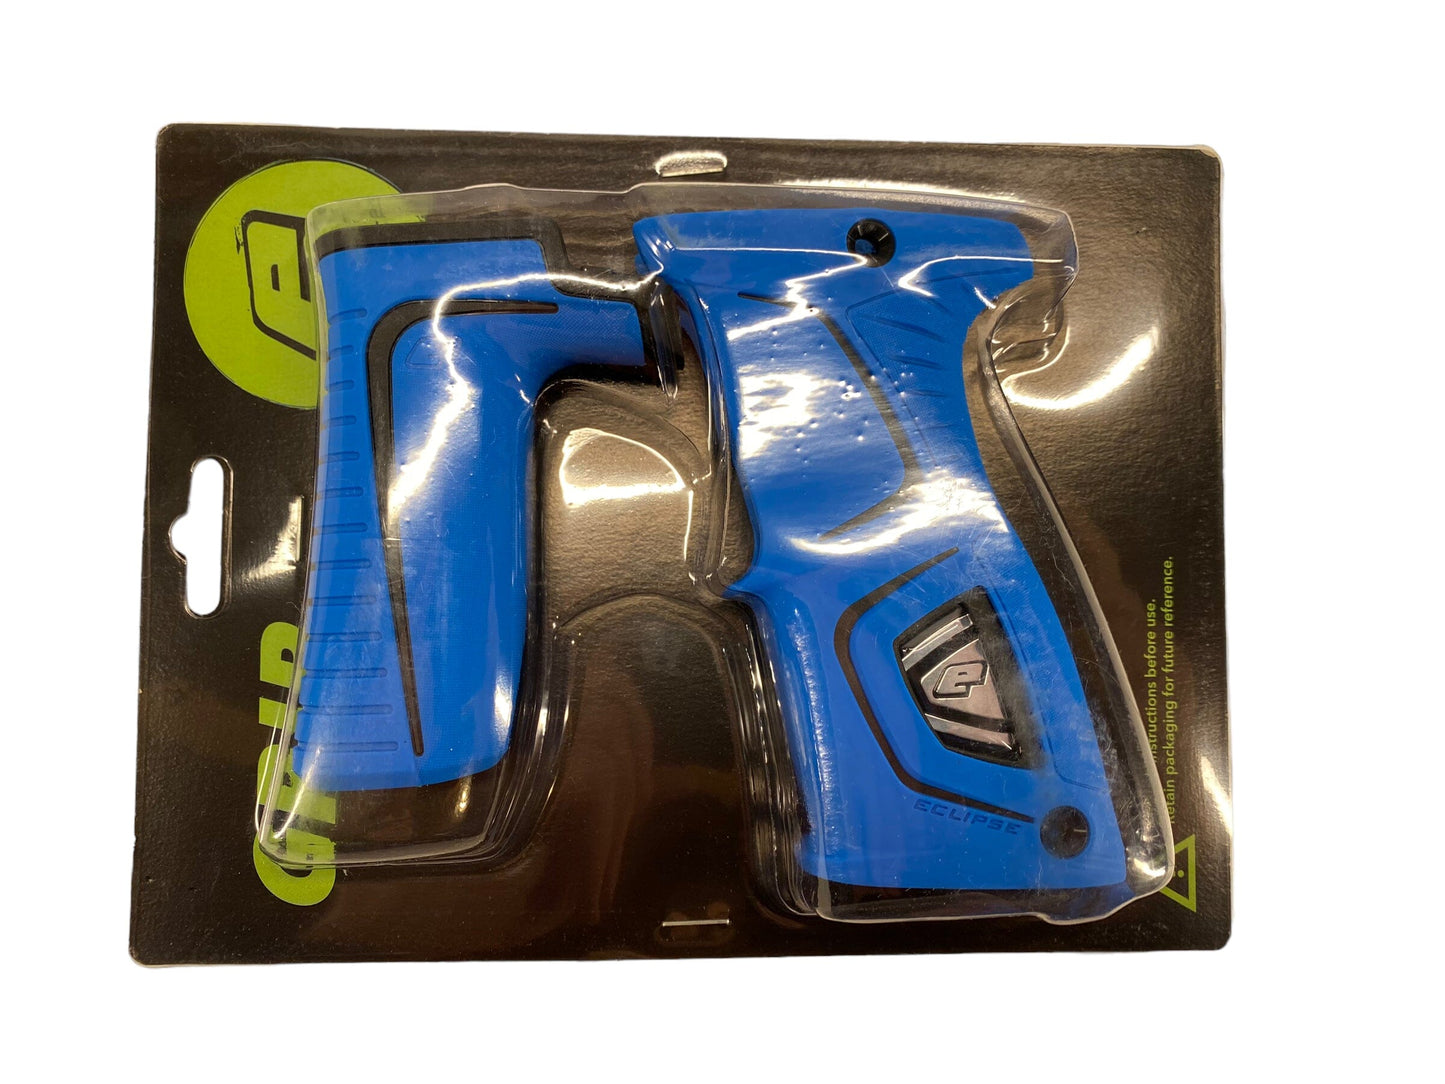 Used New Blue Planet Eclipse Paintball Grip Kit Gtek170r Paintball Gun from CPXBrosPaintball Buy/Sell/Trade Paintball Markers, Paintball Hoppers, Paintball Masks, and Hormesis Headbands